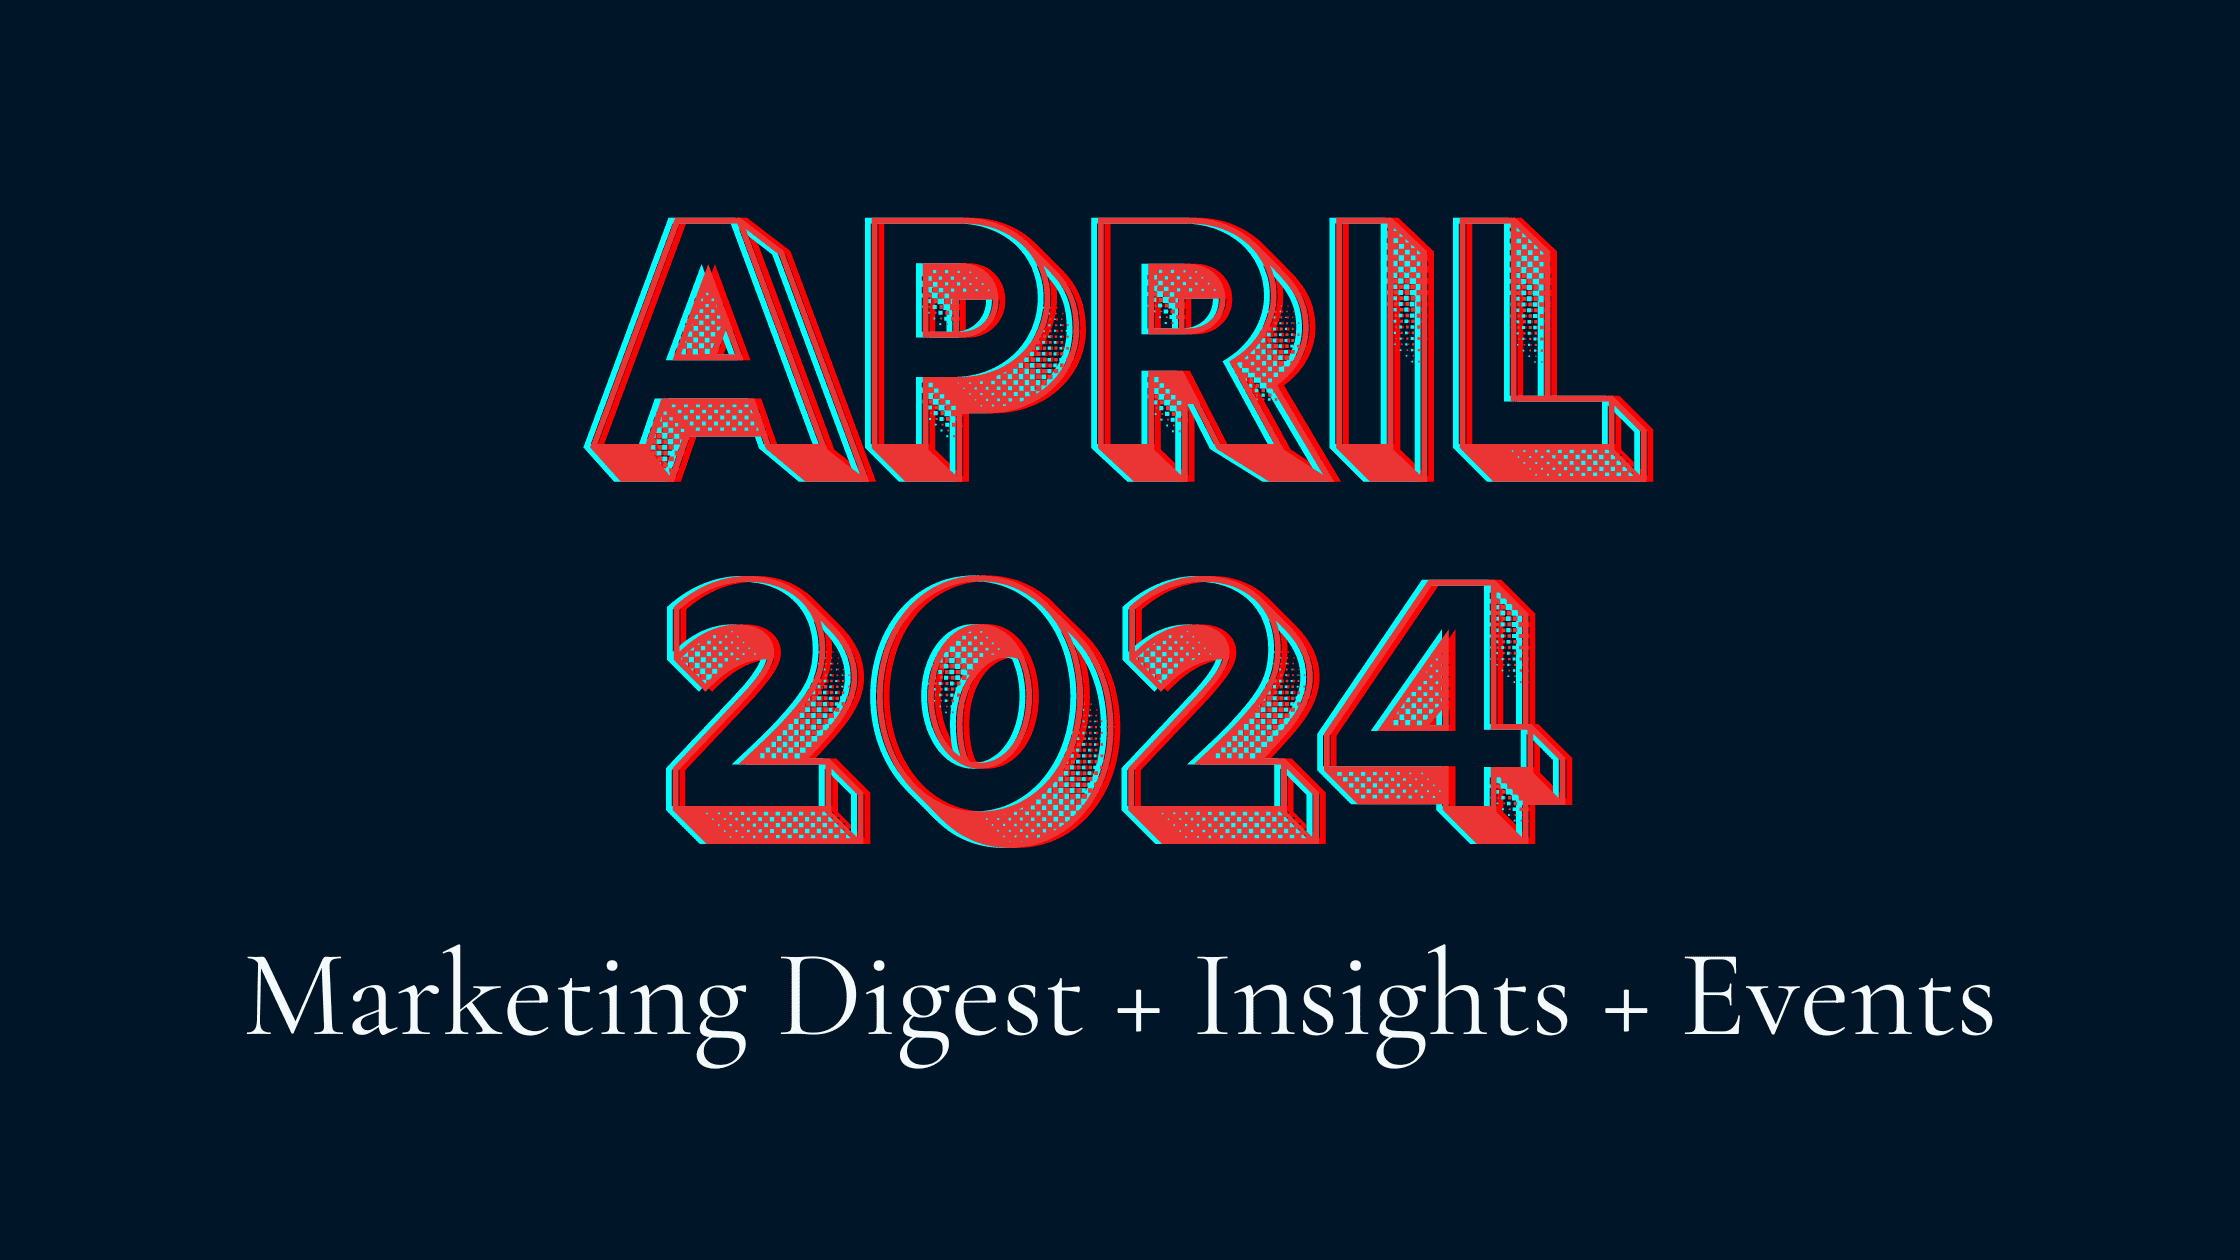 Graphic image featuring bold, large text 'april 2024' in red with blue outlines, above smaller text 'marketing digest + insights + events' on a navy blue background.